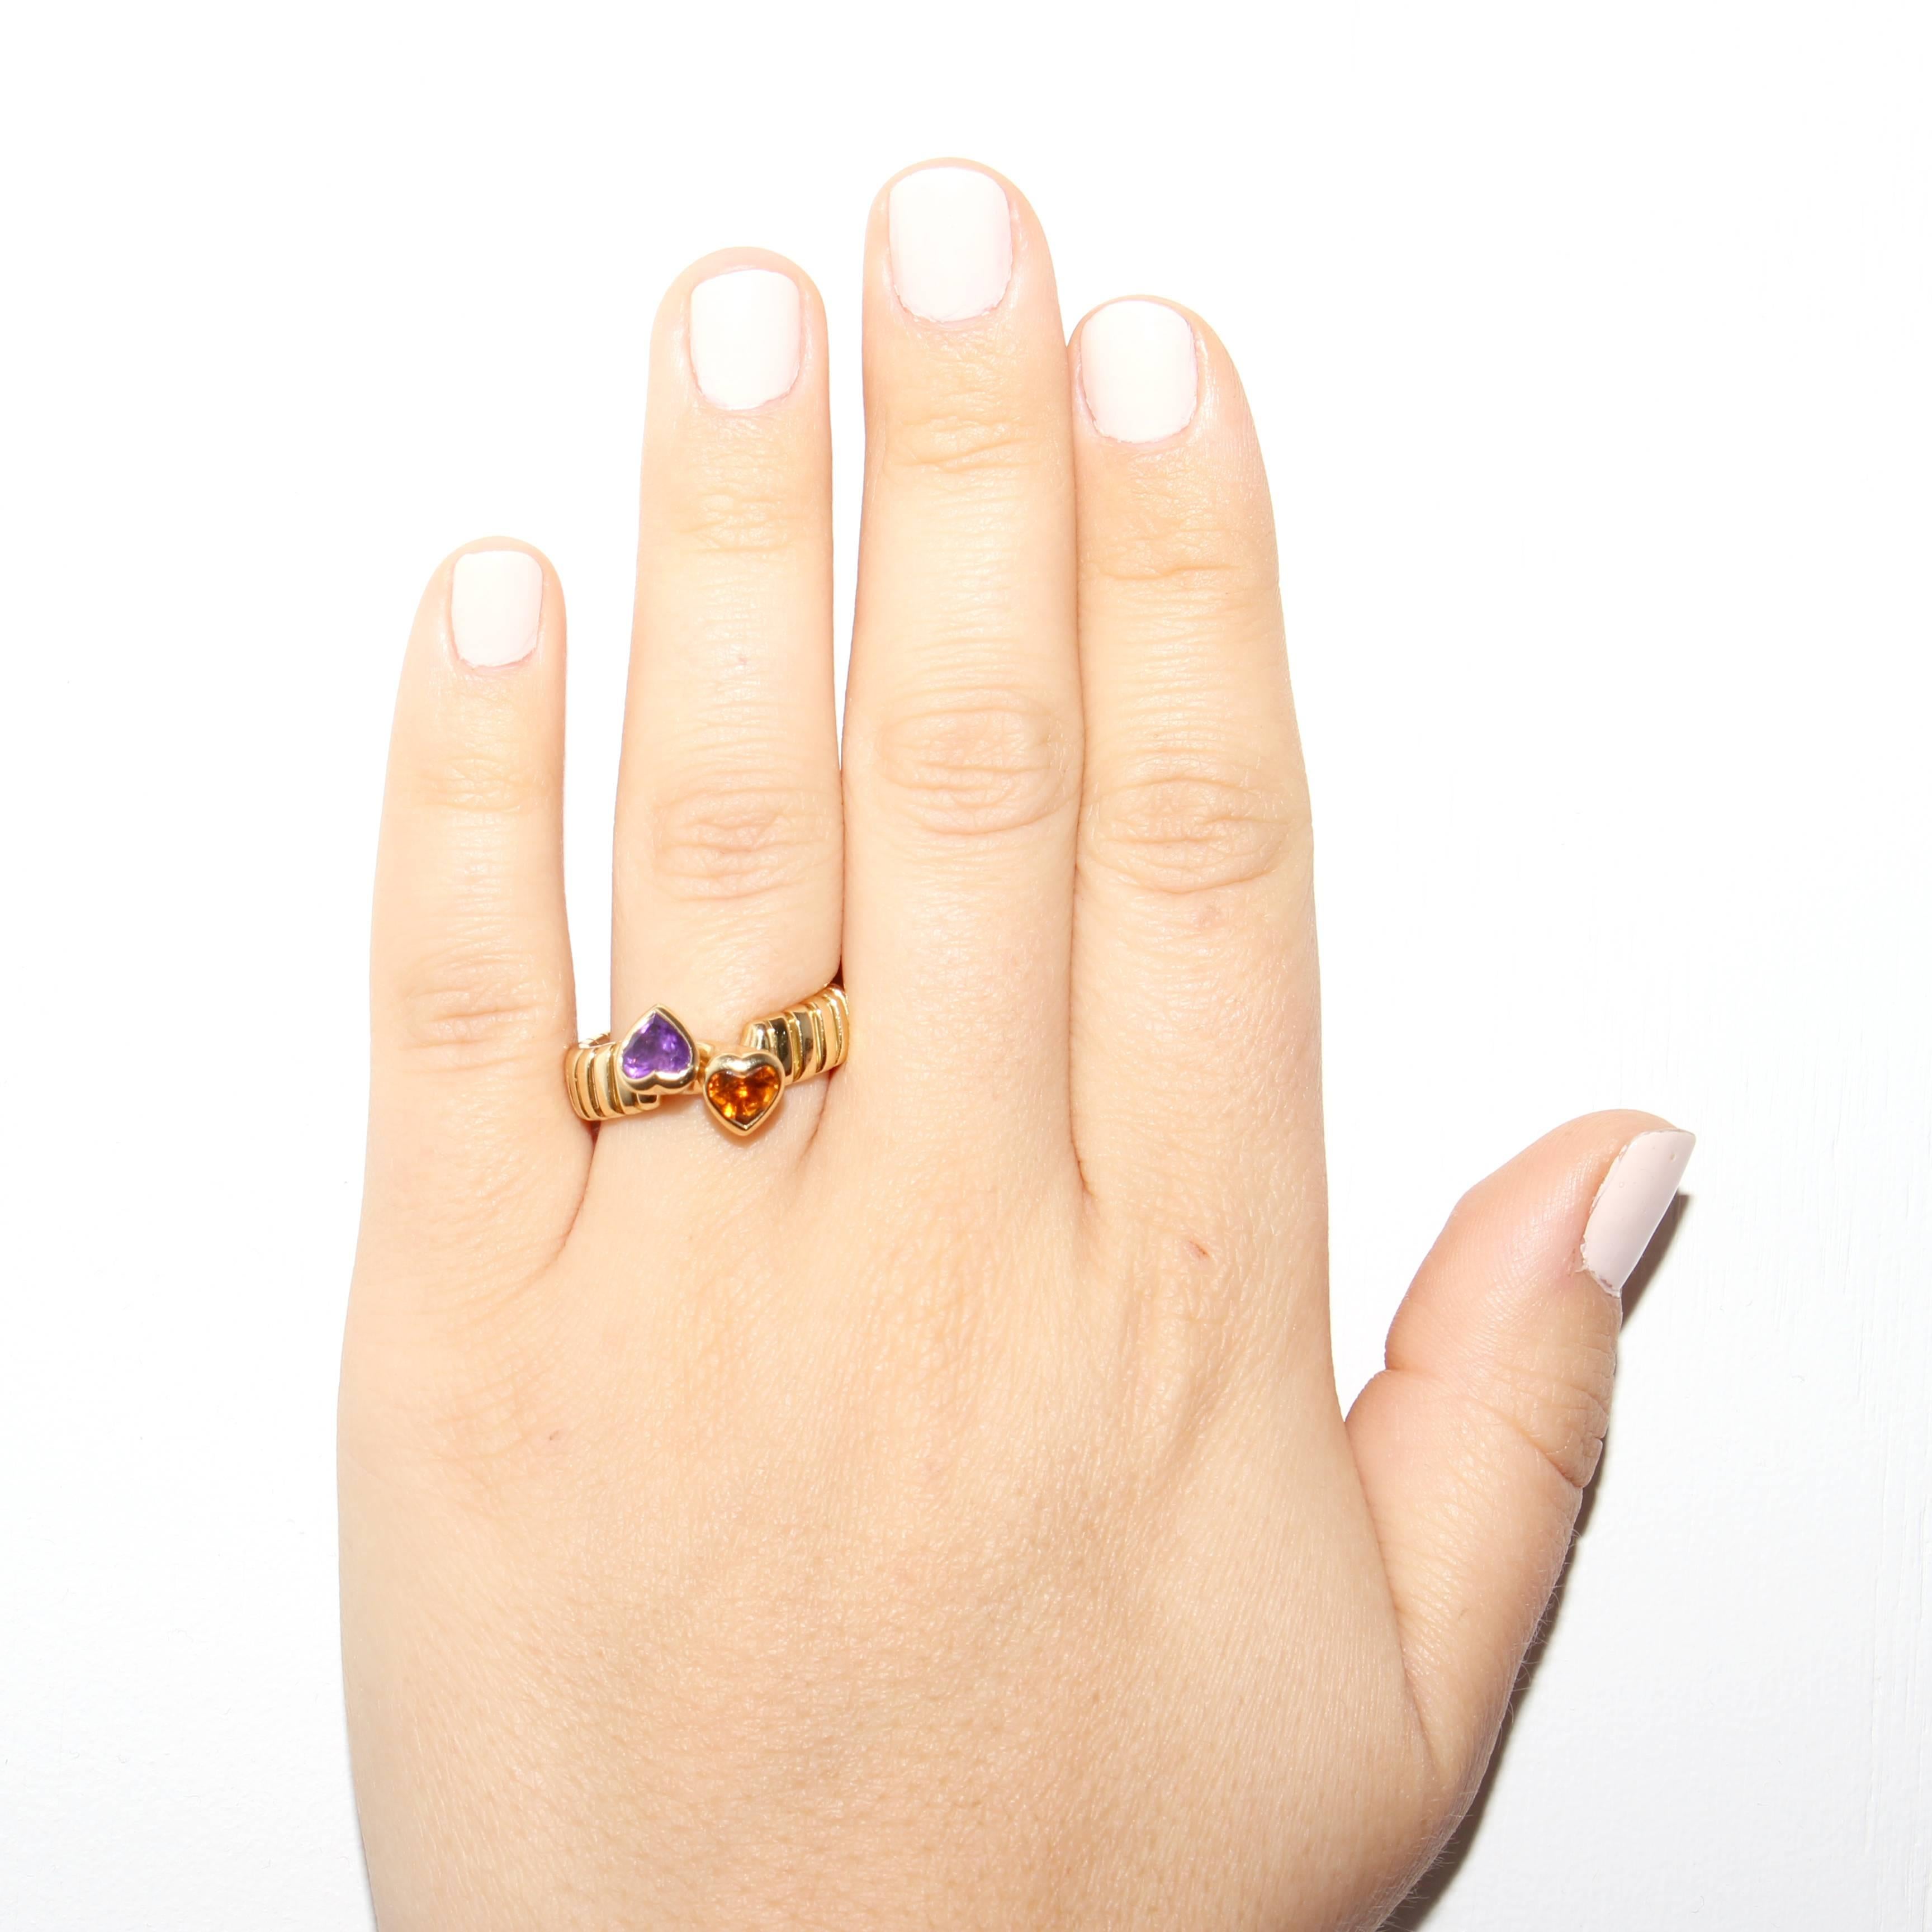 Stylish and colorful from Bulgari. Designed with a purple amethyst and a golden citrine set amid ribbed sections of 18k gold. Signed Bvlgari. Ring size 7.
